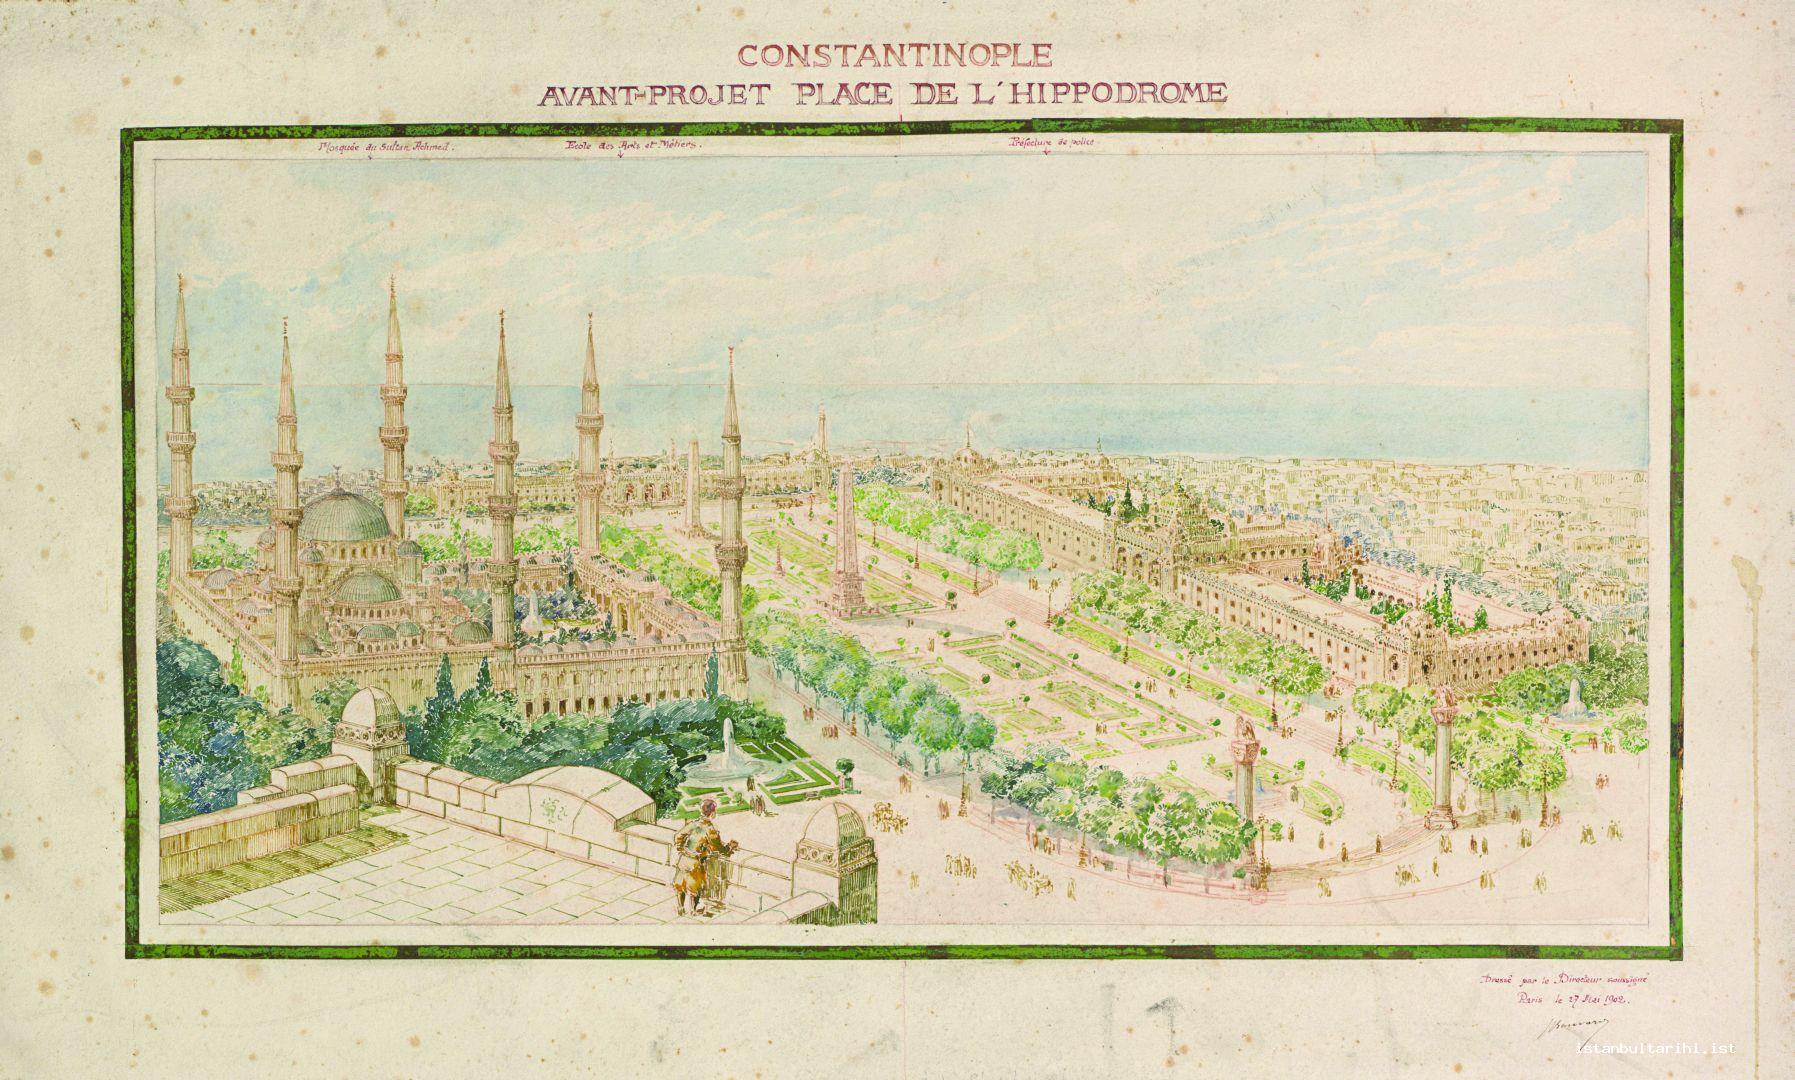 9- Antoine Bouvard’s Horse Square (Hippodrome) Project (Istanbul University, Rare Books and Special Collections Library, Maps Section)    